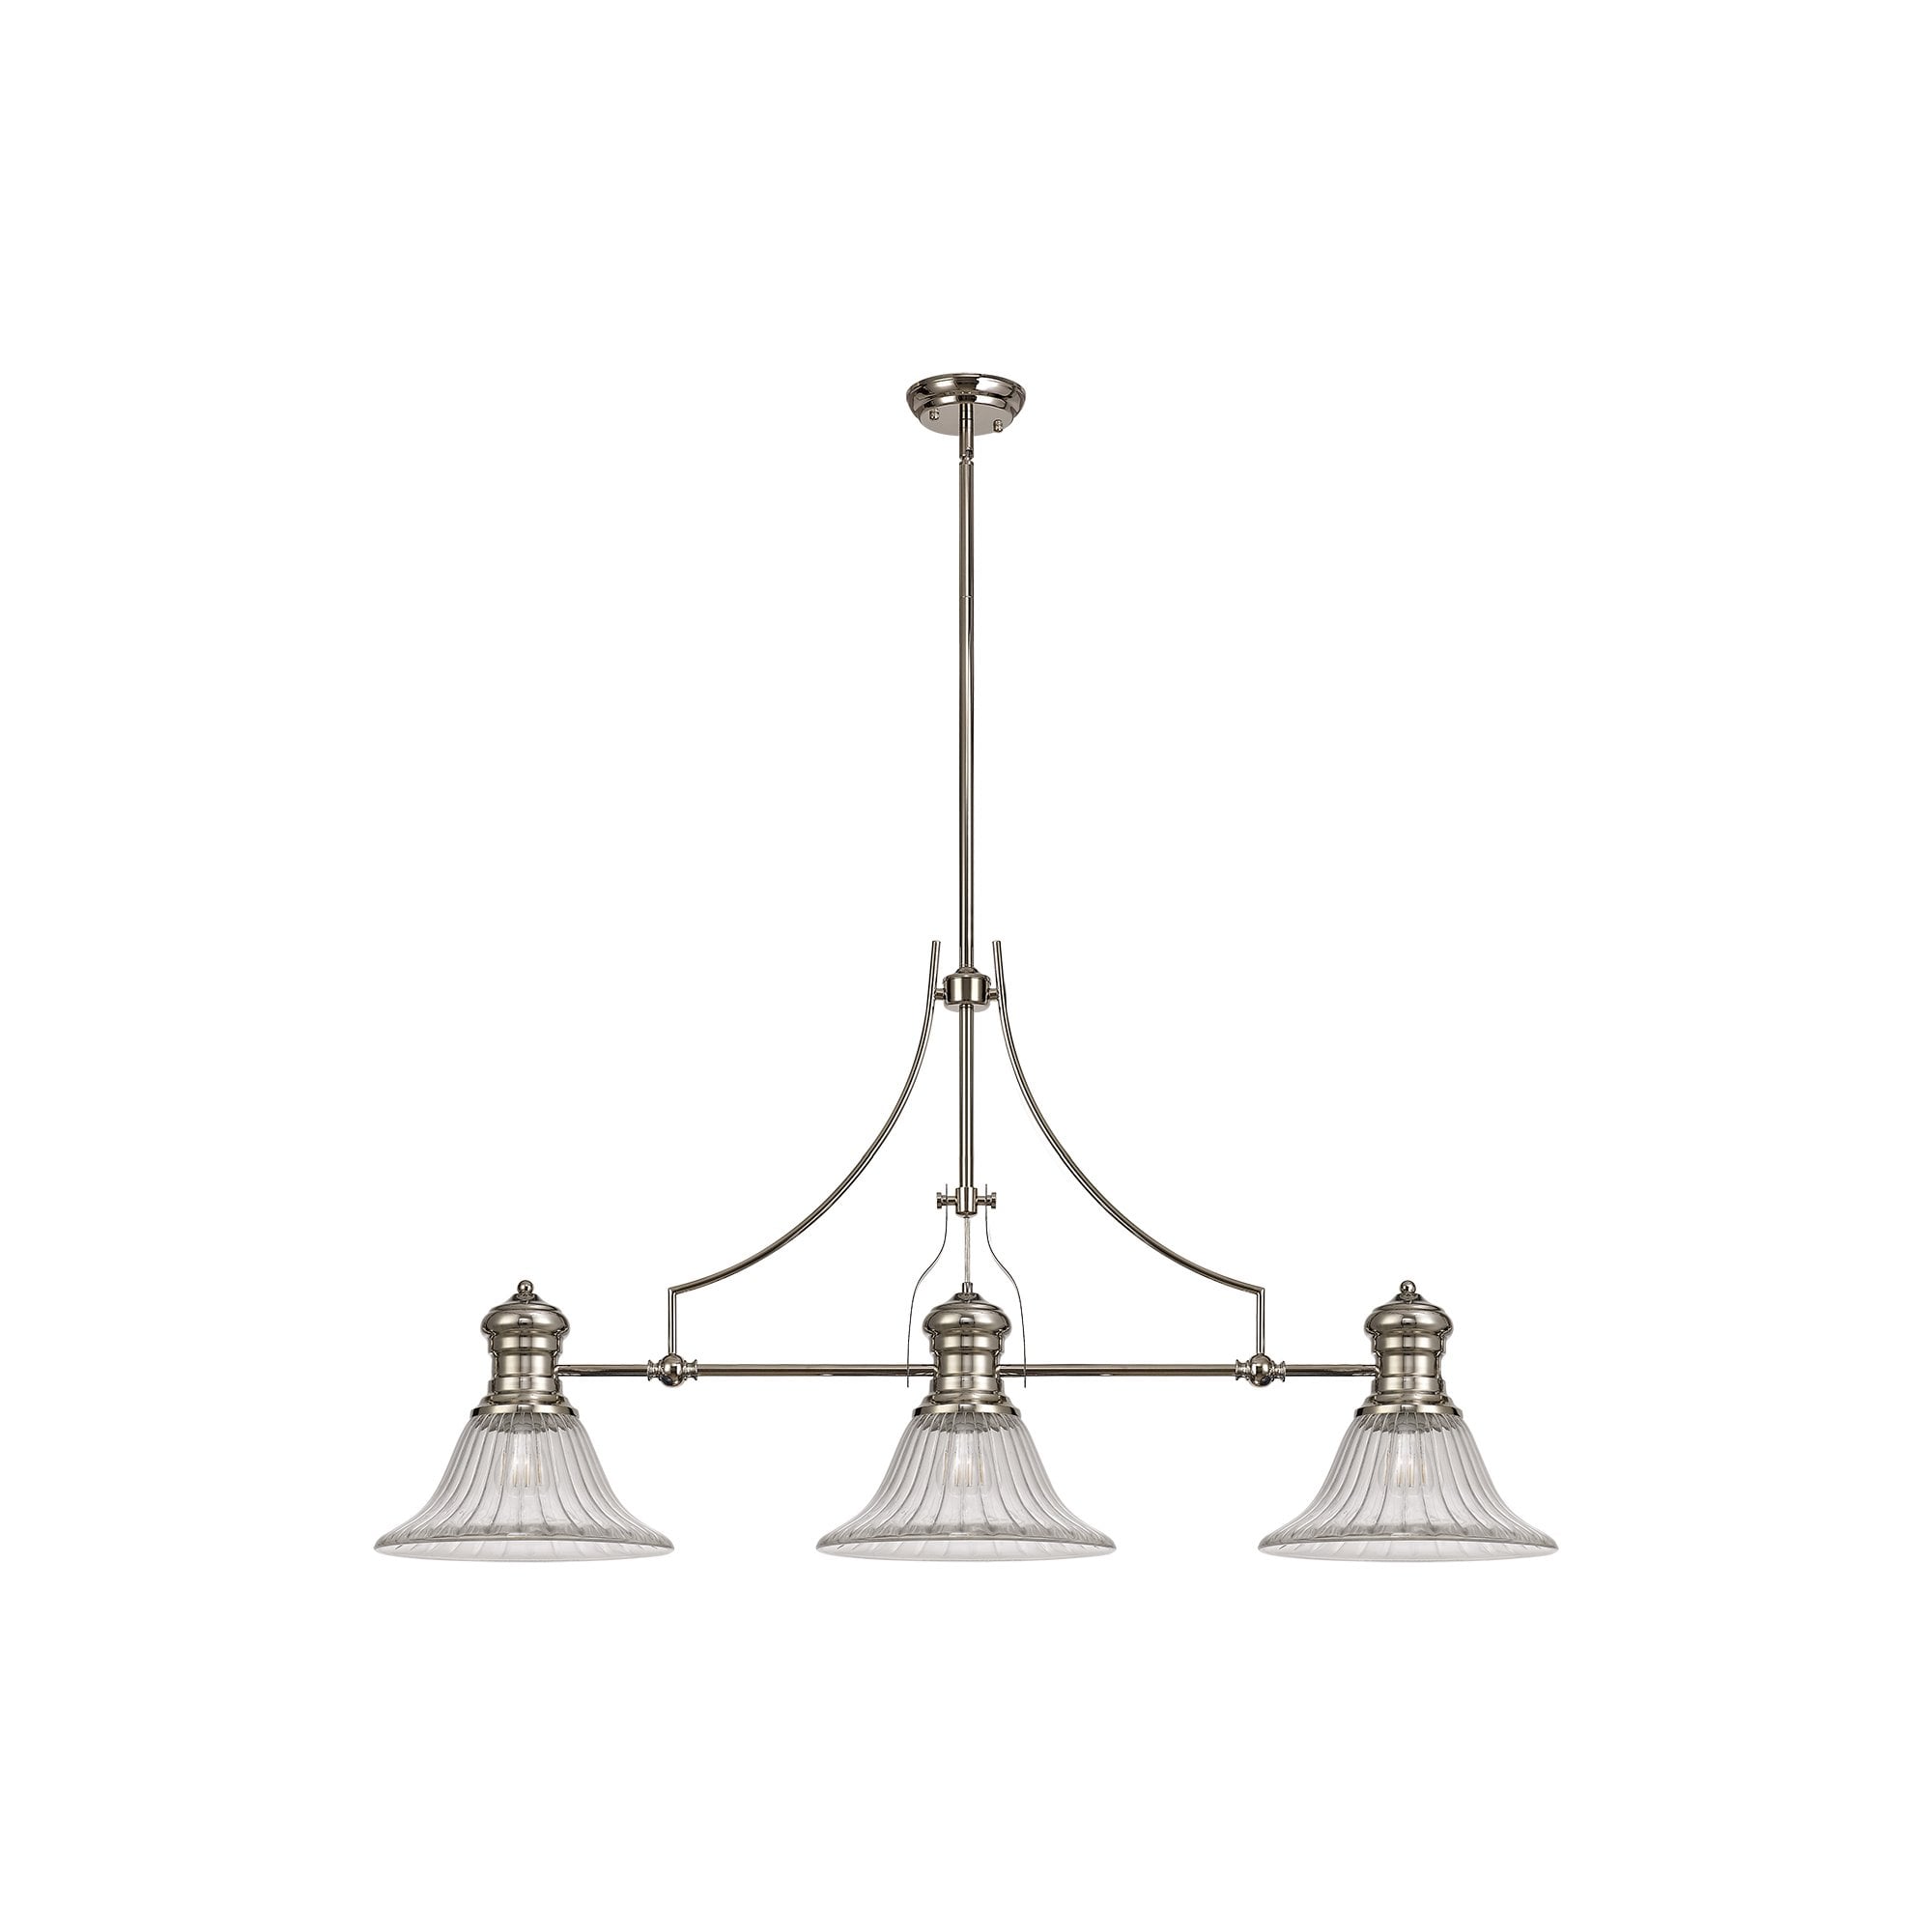 3 Light Telescopic Pendant E27 With 30cm Bell Glass Shade, Polished Nickel/Clear